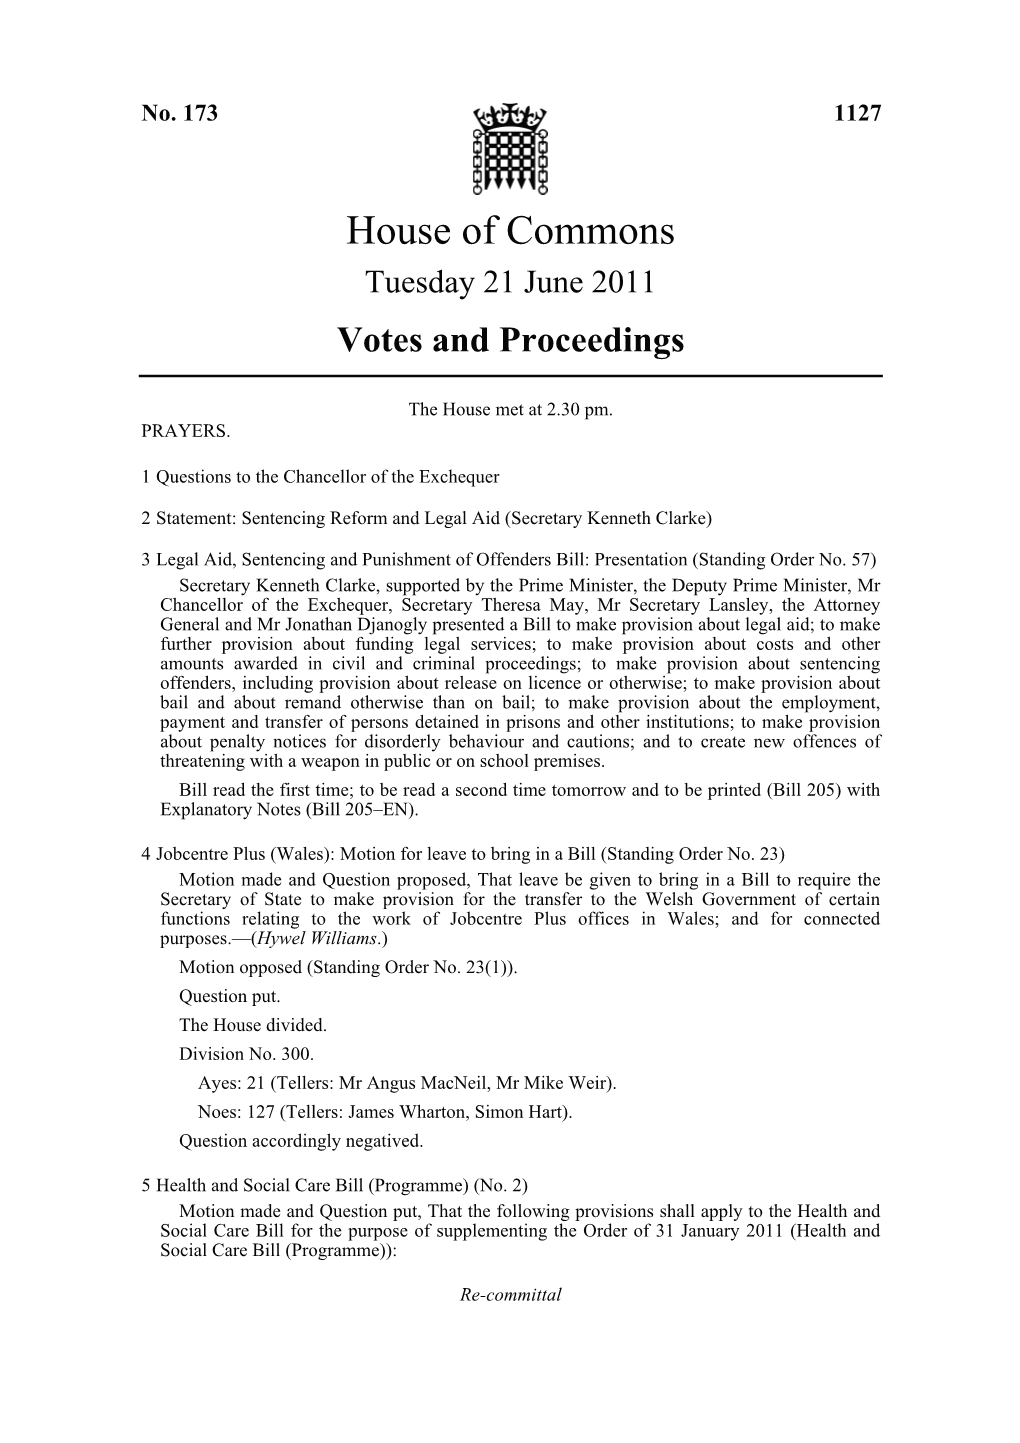 House of Commons Tuesday 21 June 2011 Votes and Proceedings